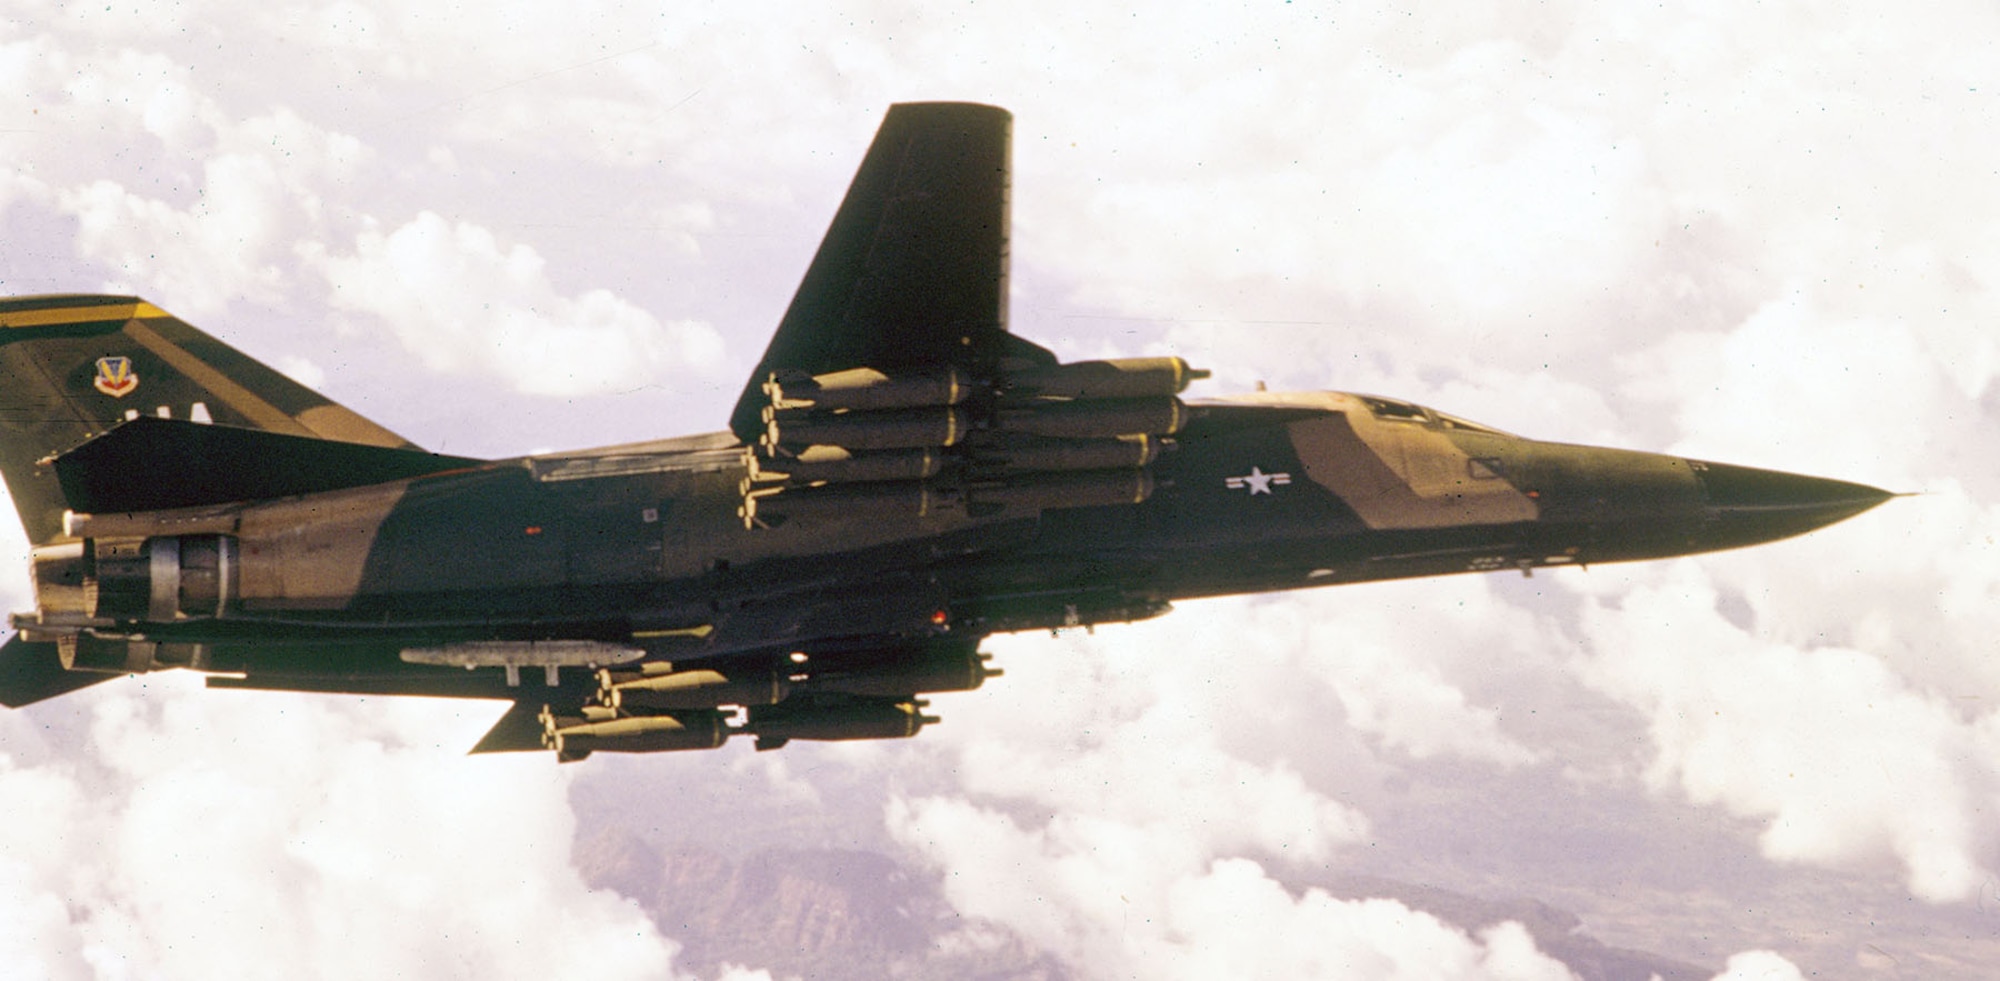 F-111A with a full load of 16 800-pound cluster bombs. (U.S. Air Force photo)